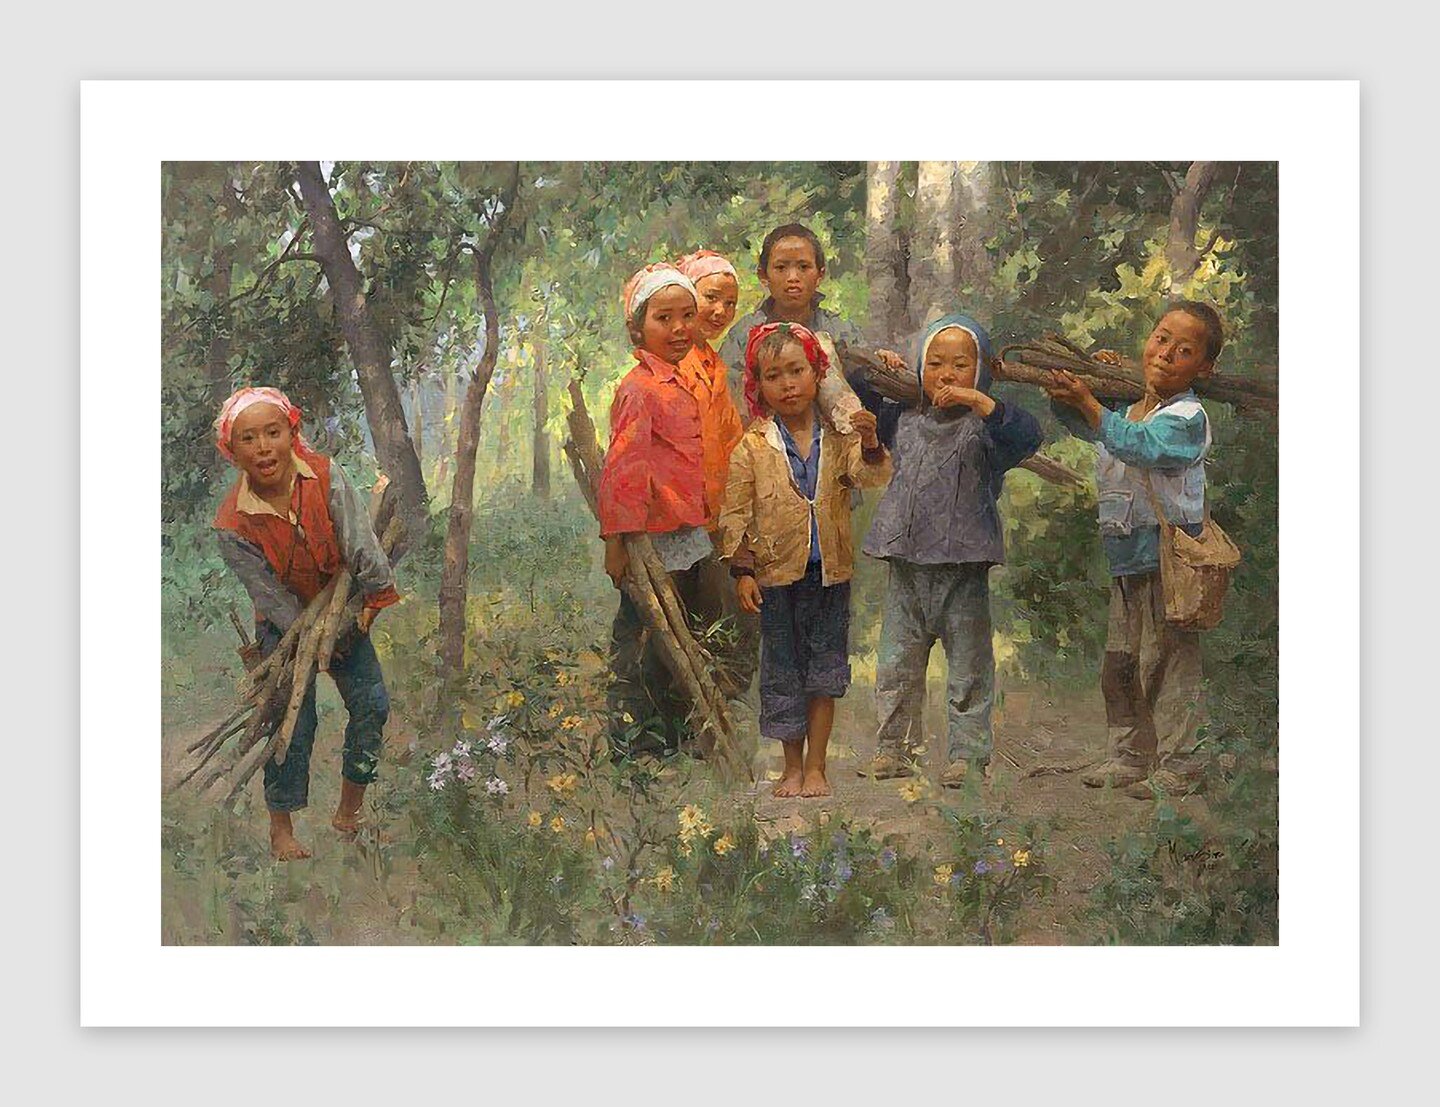 Firewood Gang 17x24 by Mian Situ

#refugeeswelcome #inmigrantes #humanrights #immigrationattorney #immigrationcanada #immigrationservices #asylumseekers #lawyer #immigrantstories #n #america #visanews #coronavirus #education #trump #inmigracion #love